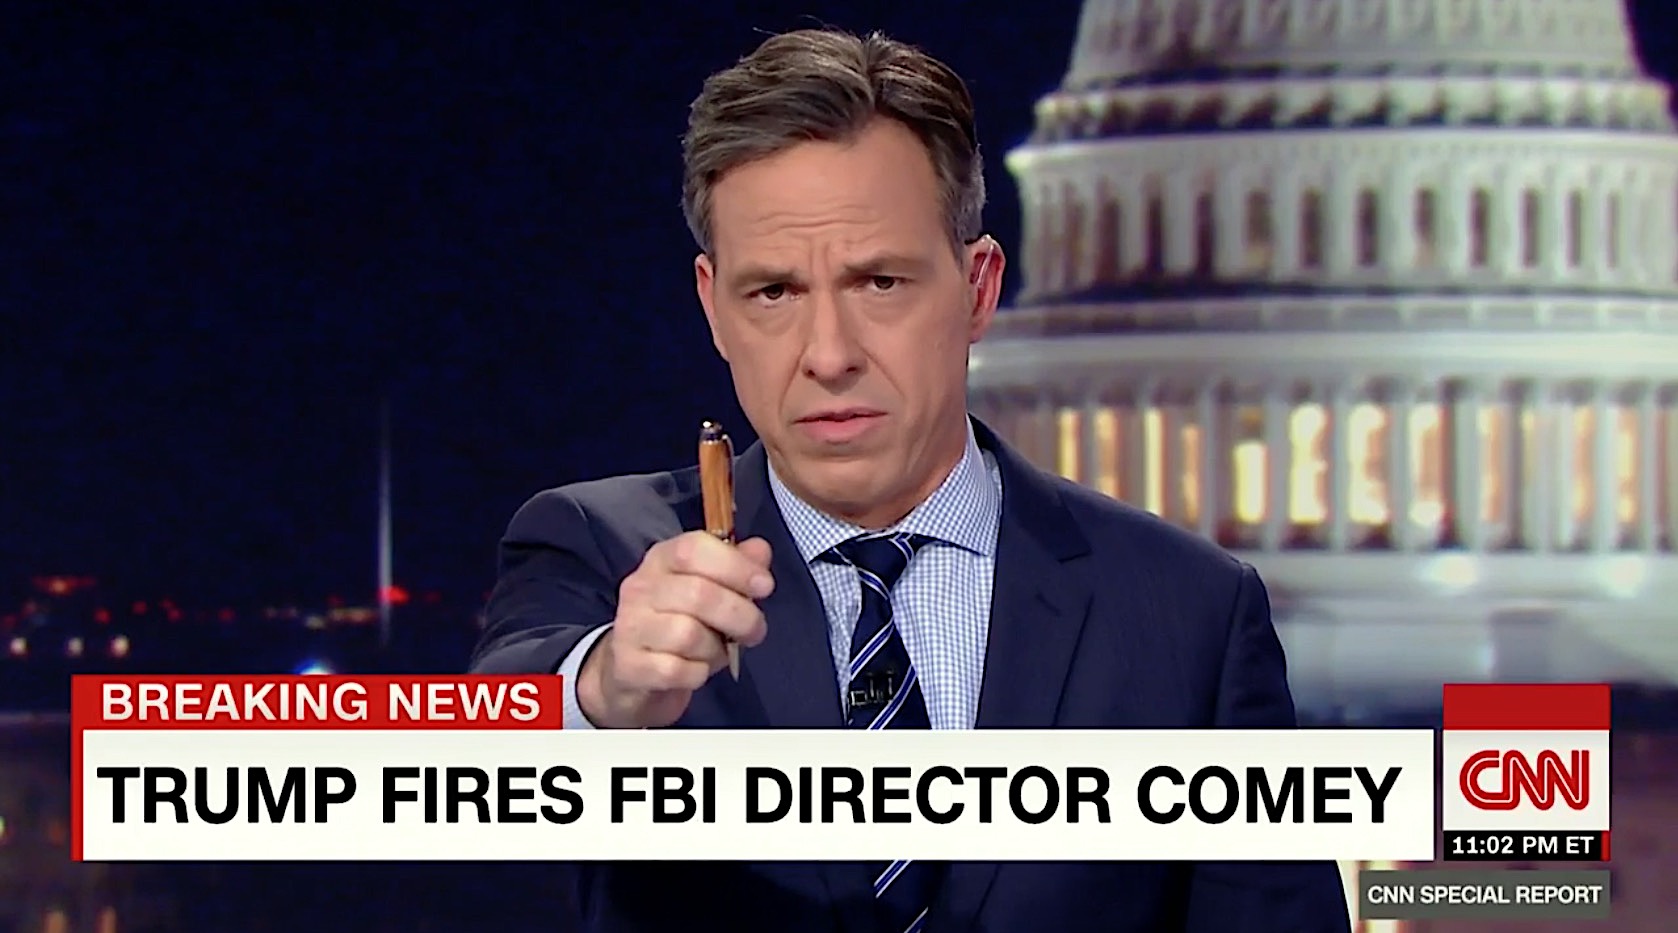 Jake Tapper is skeptical of the official explanation